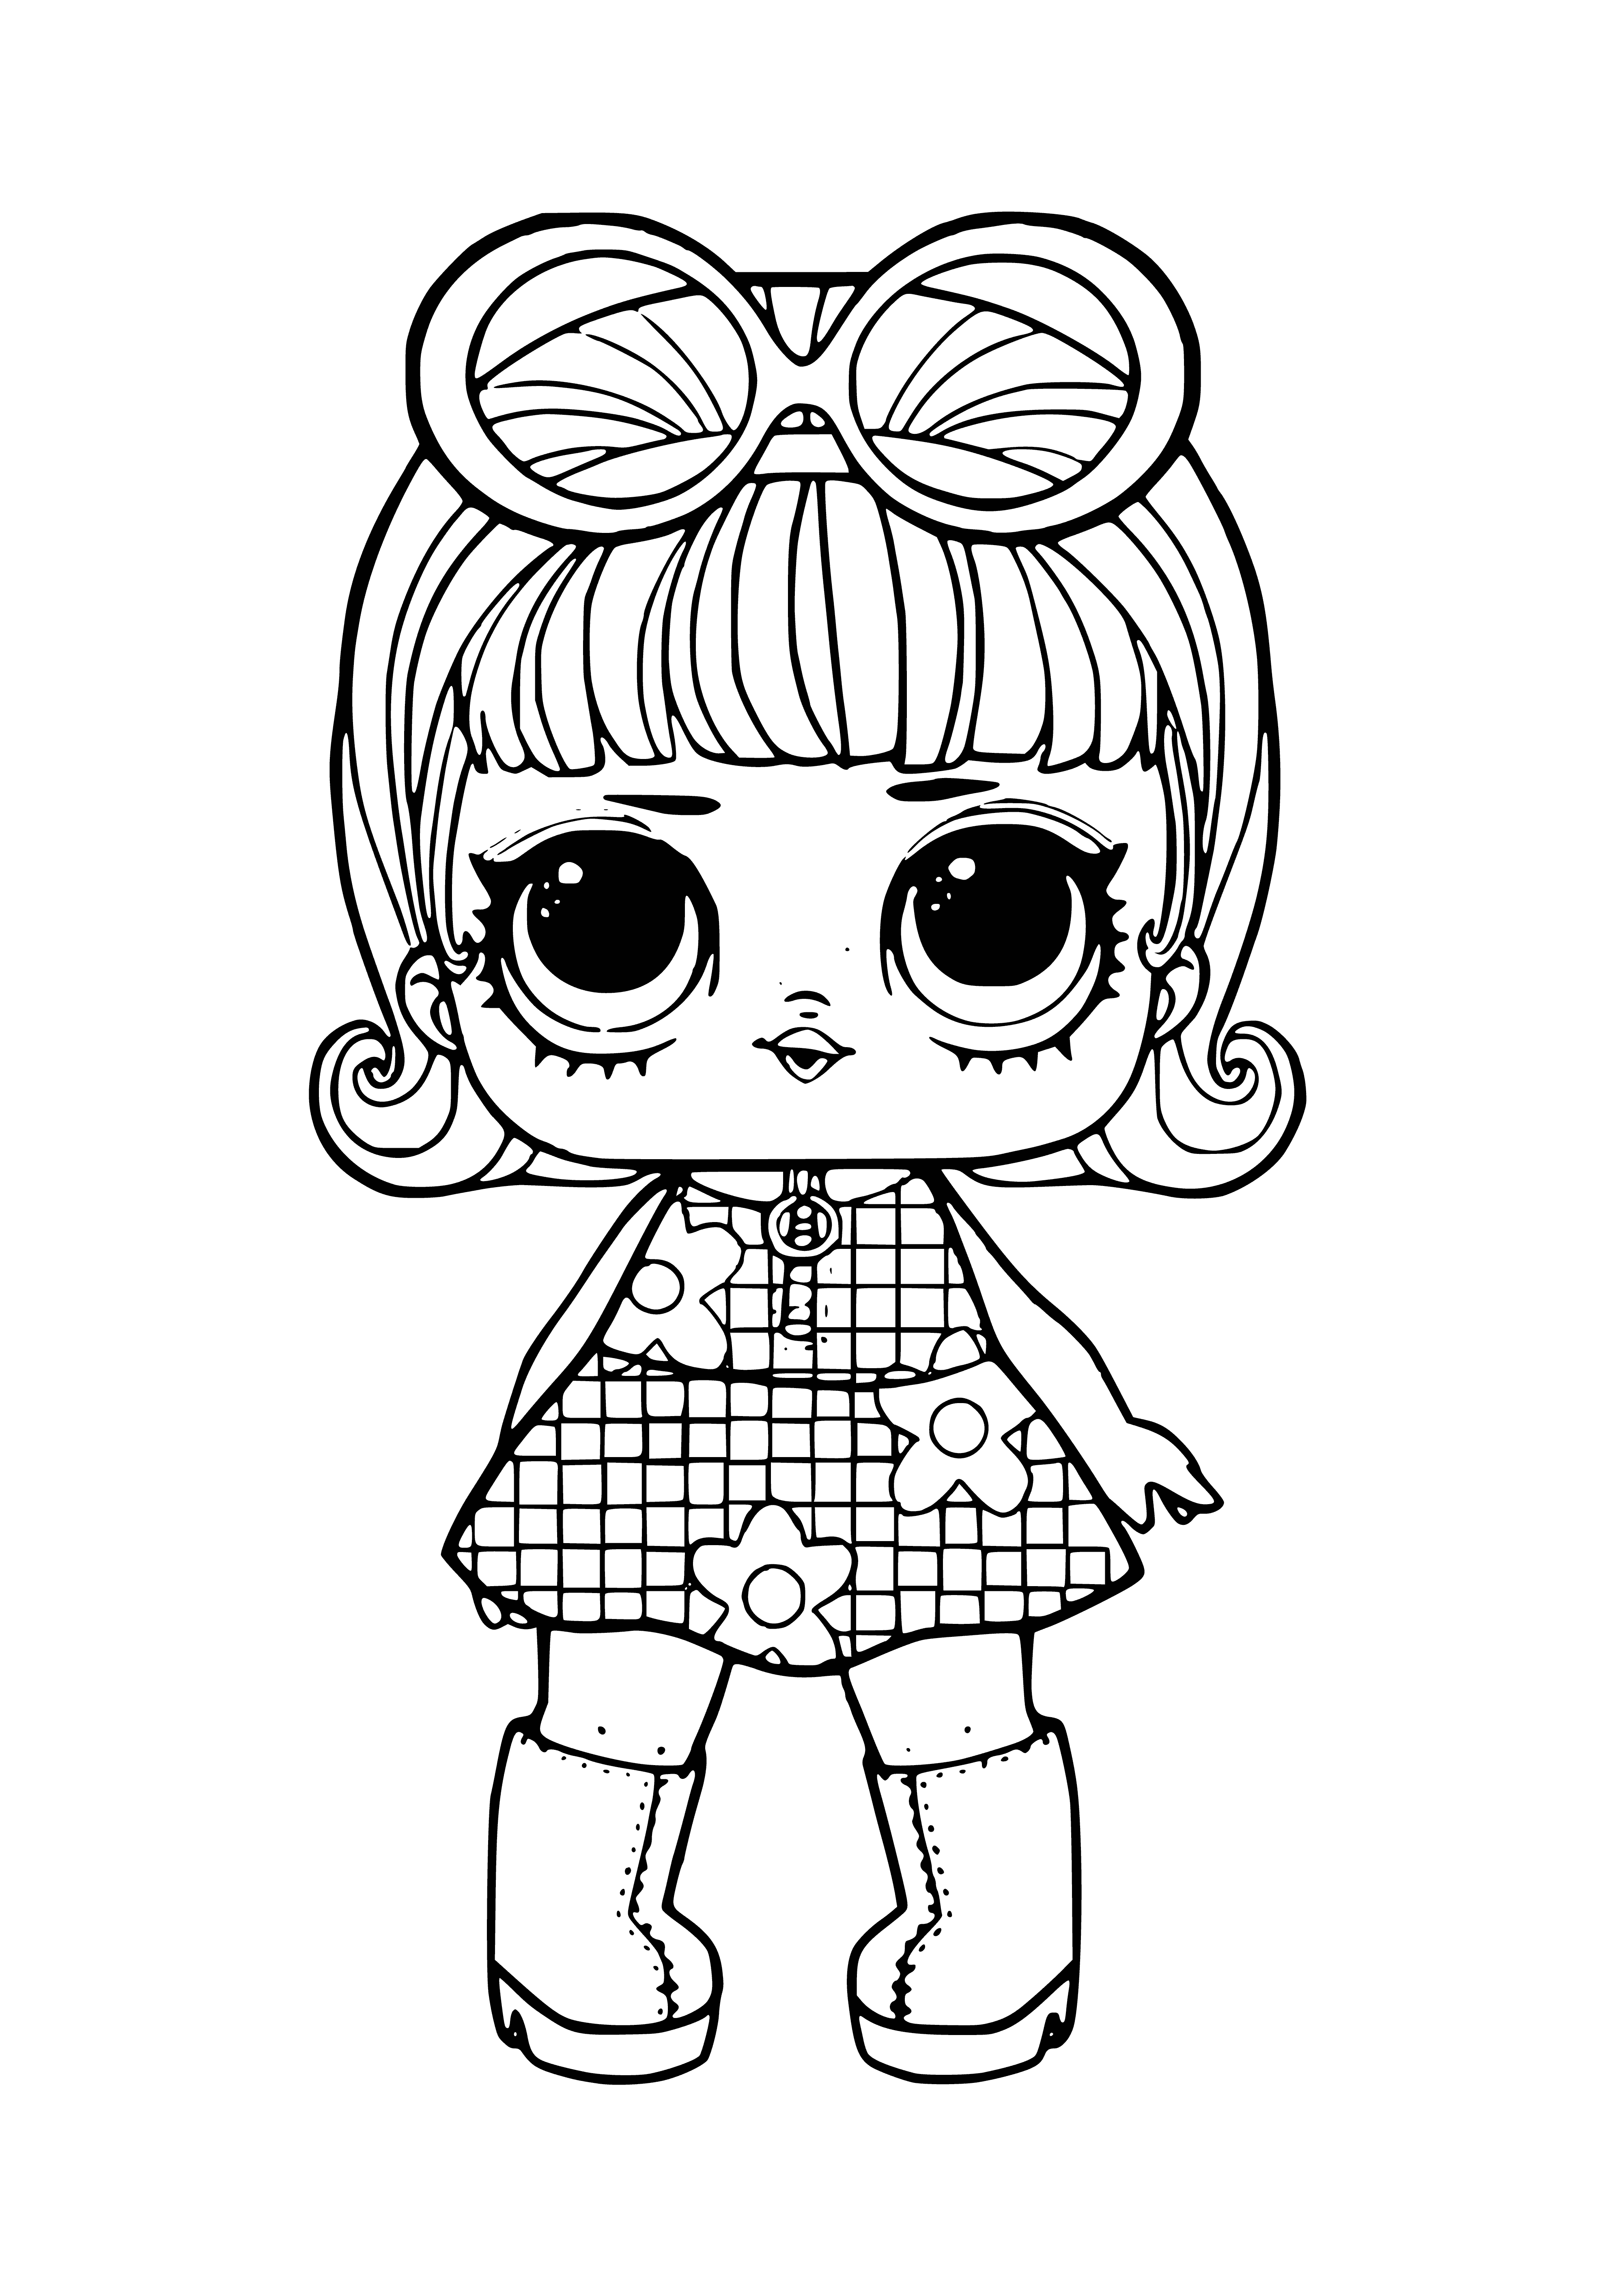 coloring page: 6 toy figurines in package; all different colors, glitter & clothing; includes a playset of furniture & a window. #toyfigurines #LOLtoys